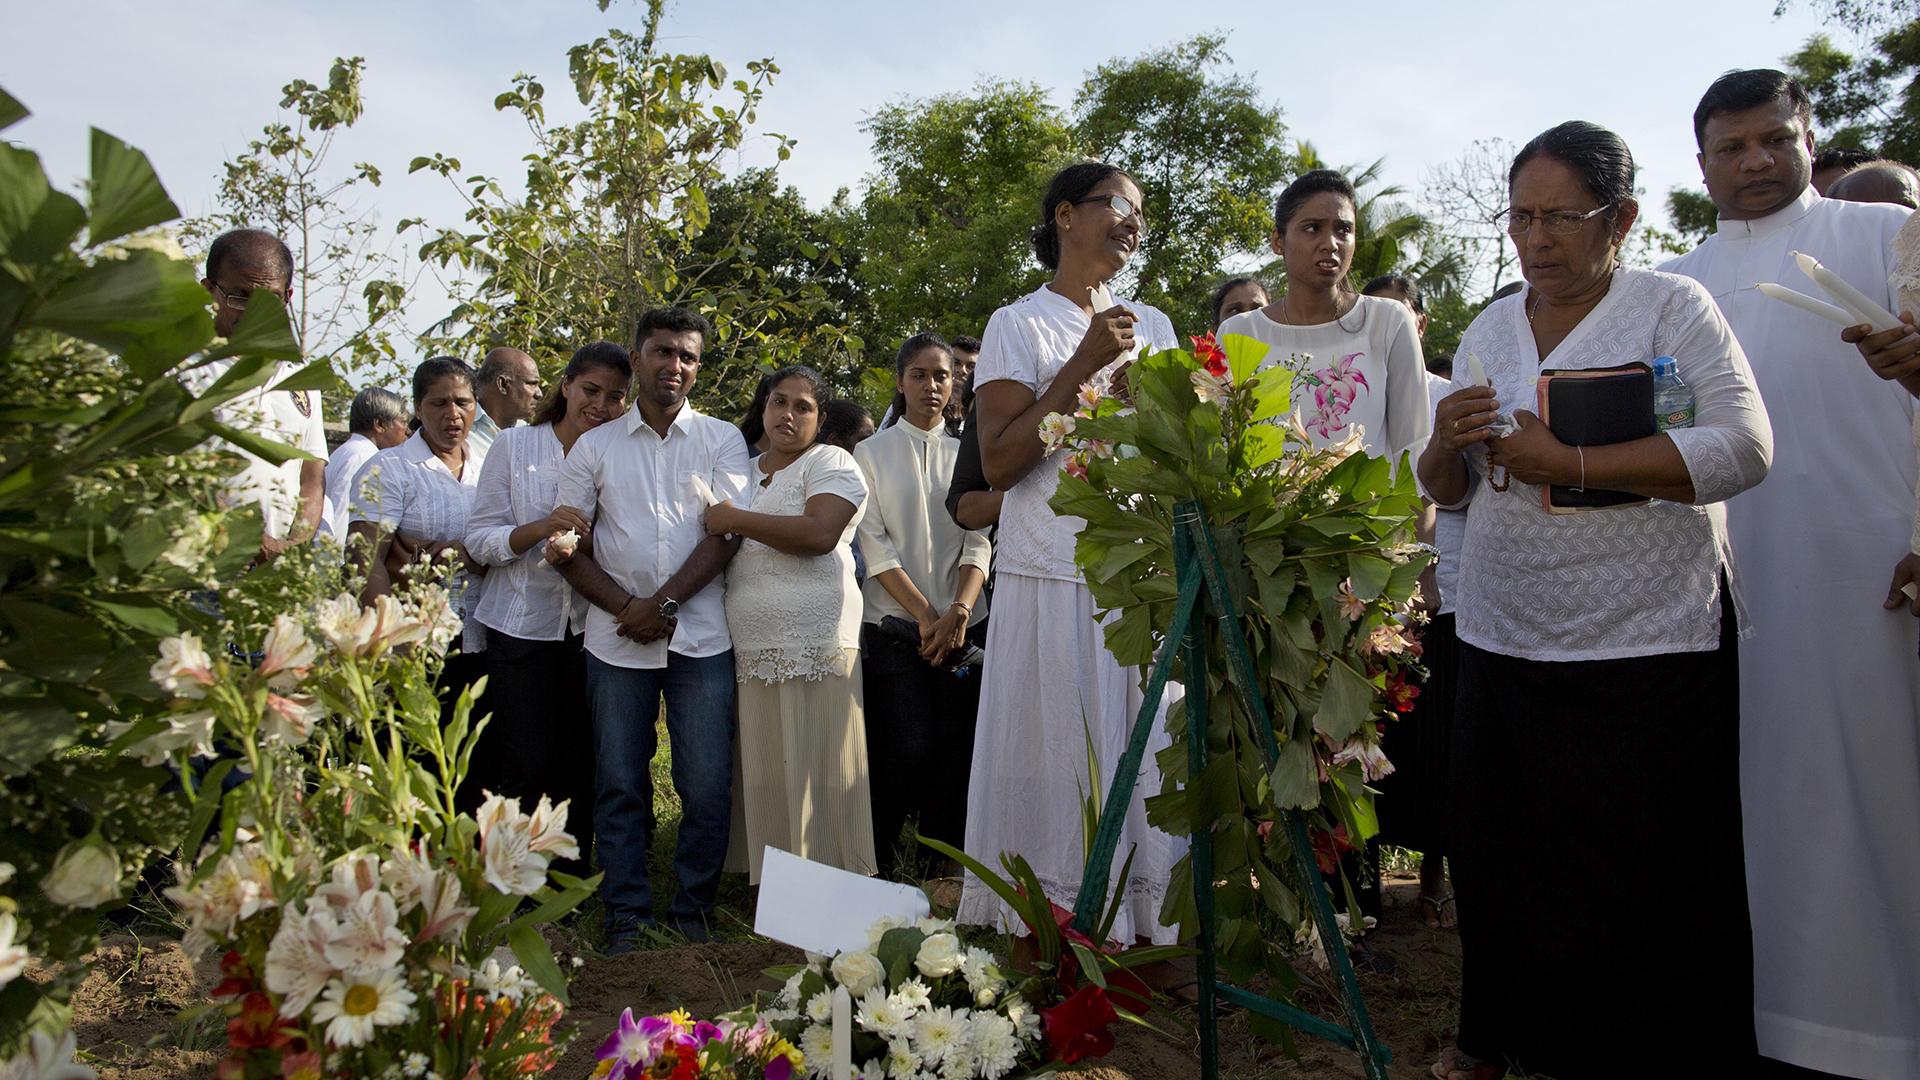 Family members mourn Tuesday, April 23, 2019 at the burial of 7-year-old Dhulodh Anthony, a victim of an Easter Sunday bomb blast, at Methodist cemetery in Negombo, Sri Lanka. (AP Photo / Gemunu Amarasinghe)